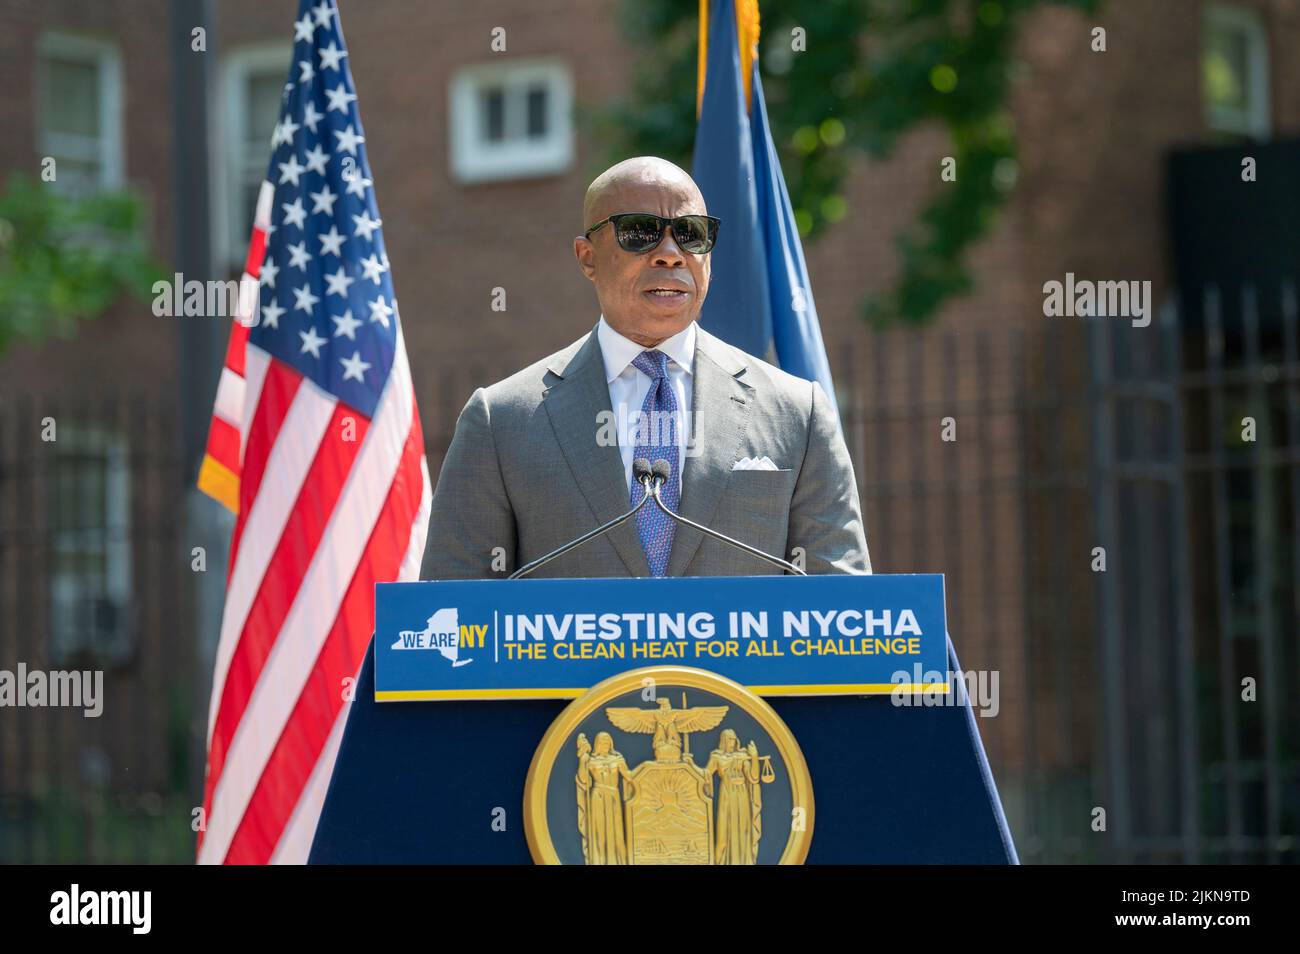 NEW YORK, NEW YORK - AUGUST 02: Mayor Eric Adams speaks during a joint housing and clean energy-related announcement at Woodside Houses NYCHA complex on August 2, 2022, in Queens Borough of New York City.   Governor Hochul and Mayor Adams announce $70 million initial investment to decarbonize NYCHA buildings as part of clean heat for all challenge. Credit: Ron Adar/Alamy Live News Stock Photo